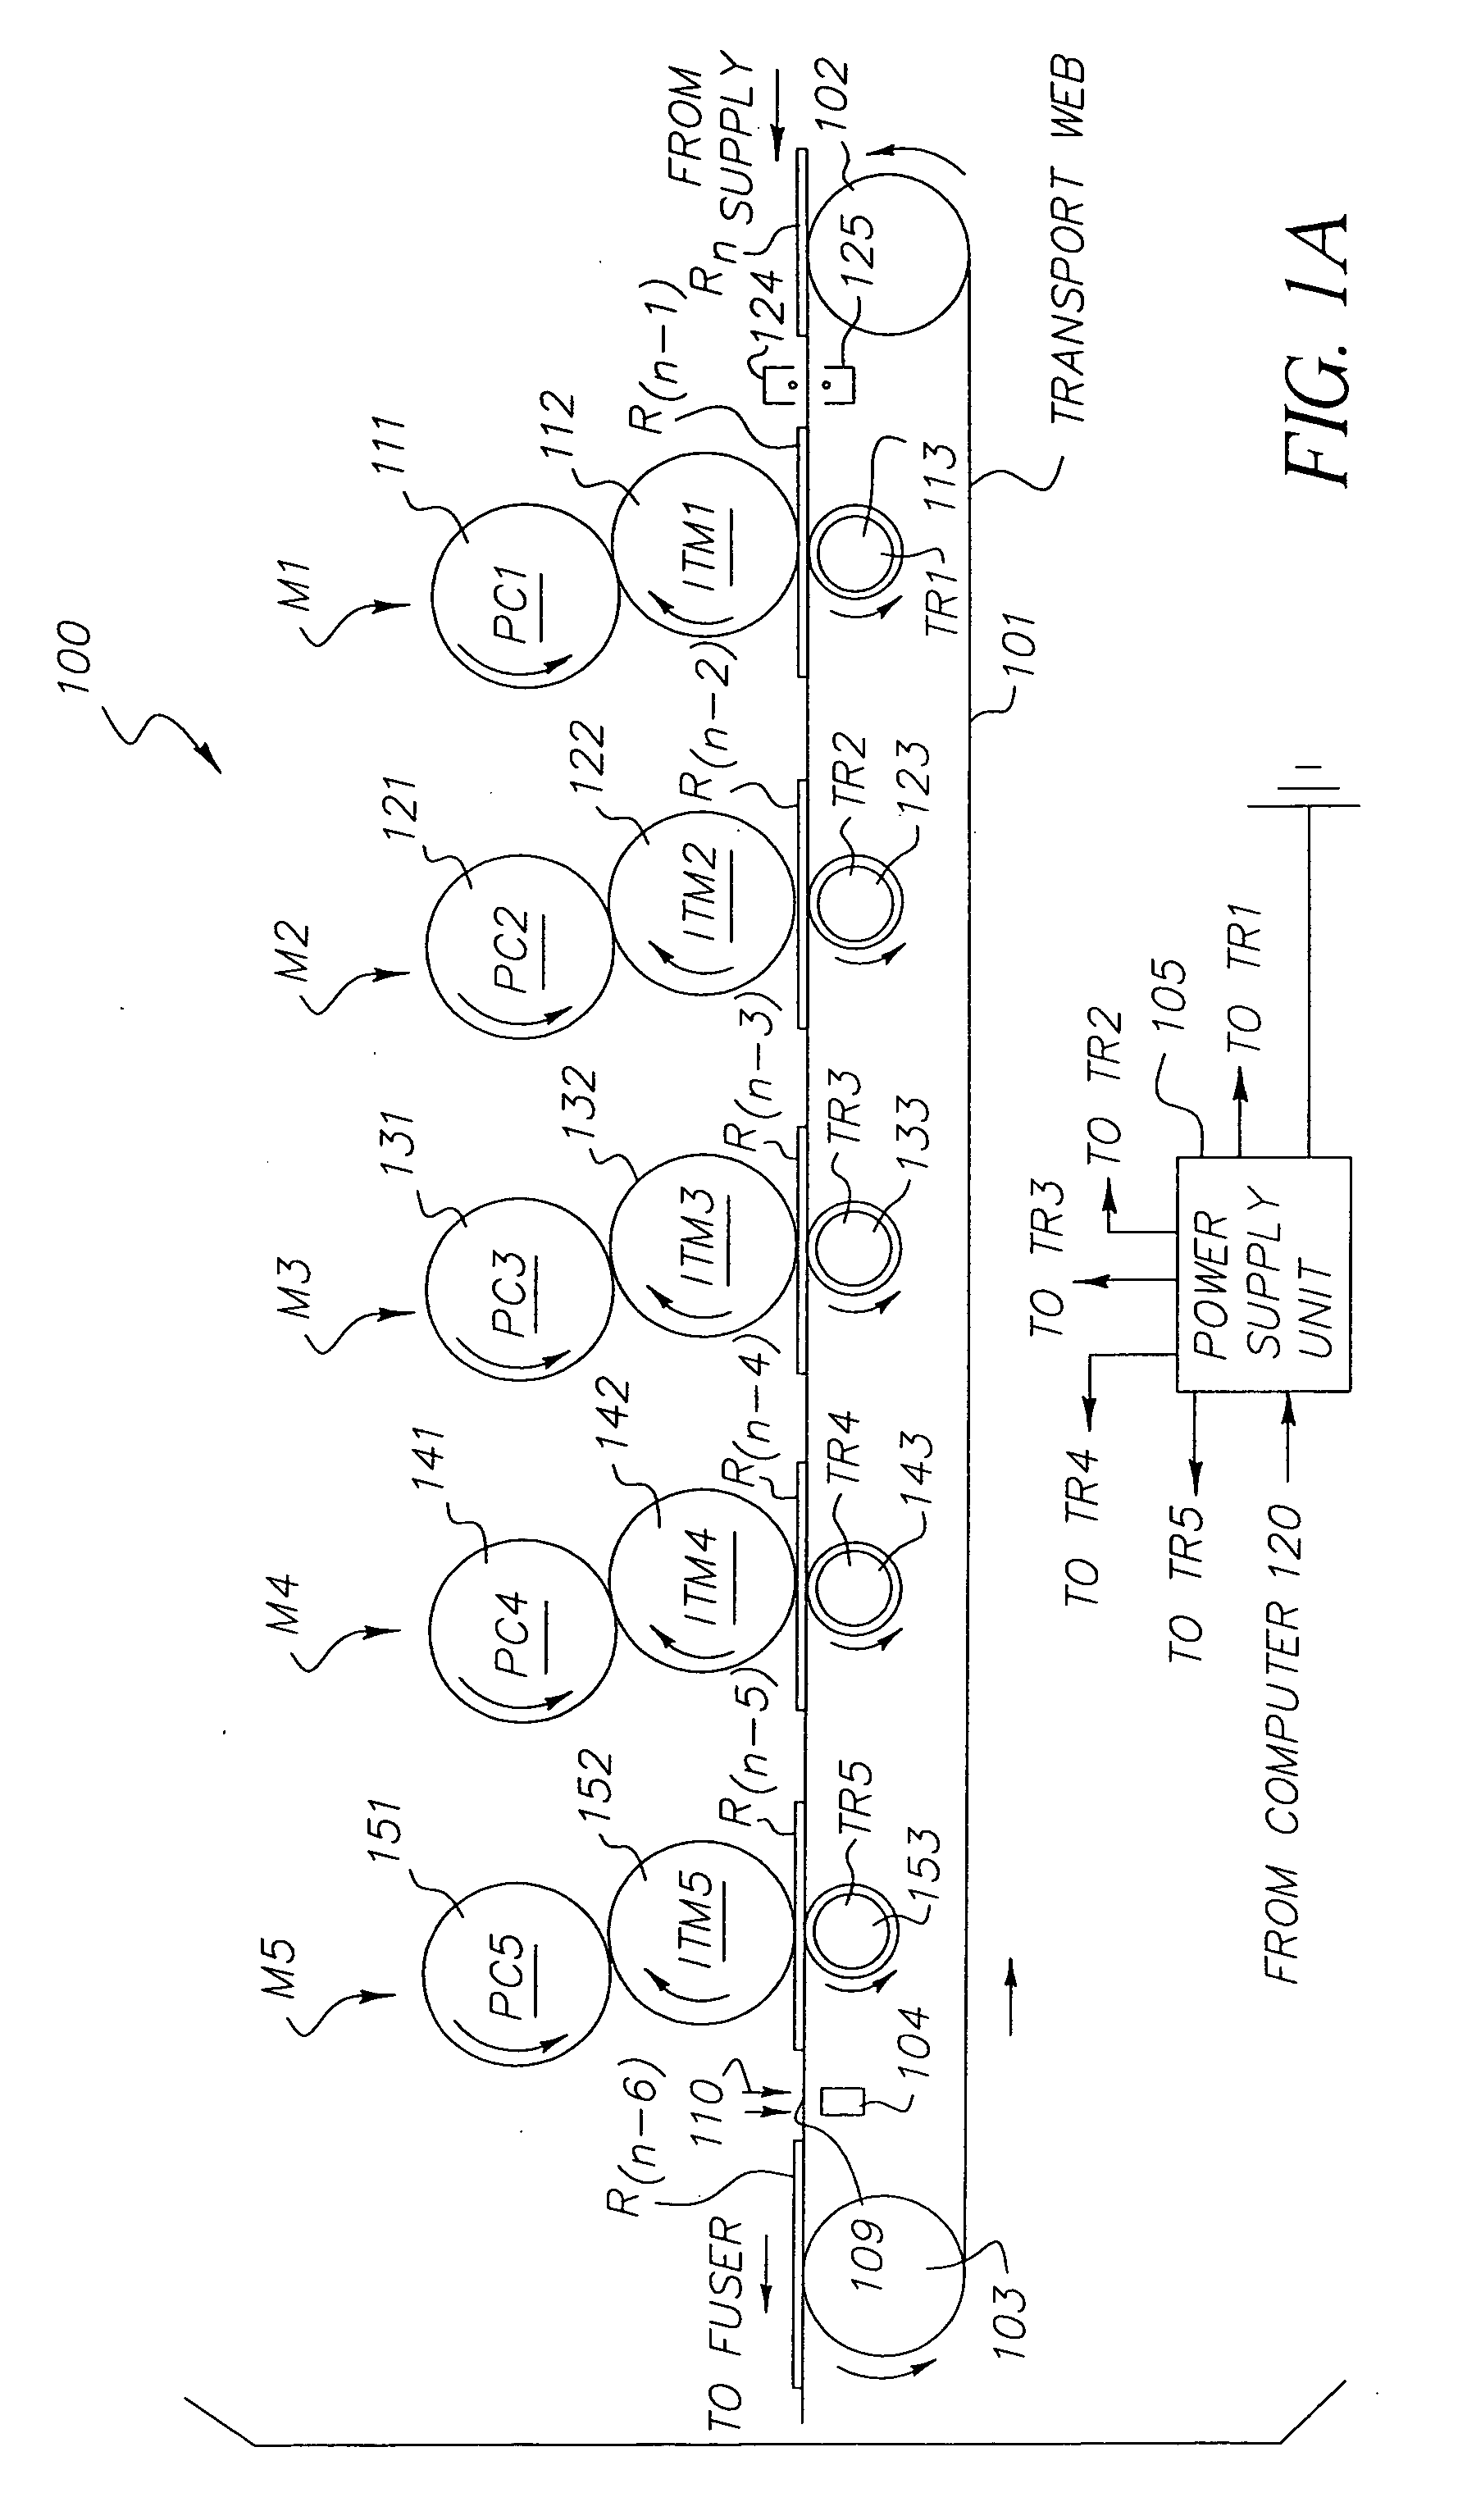 Method and apparatus for printing using a tandem electrostatographic printer